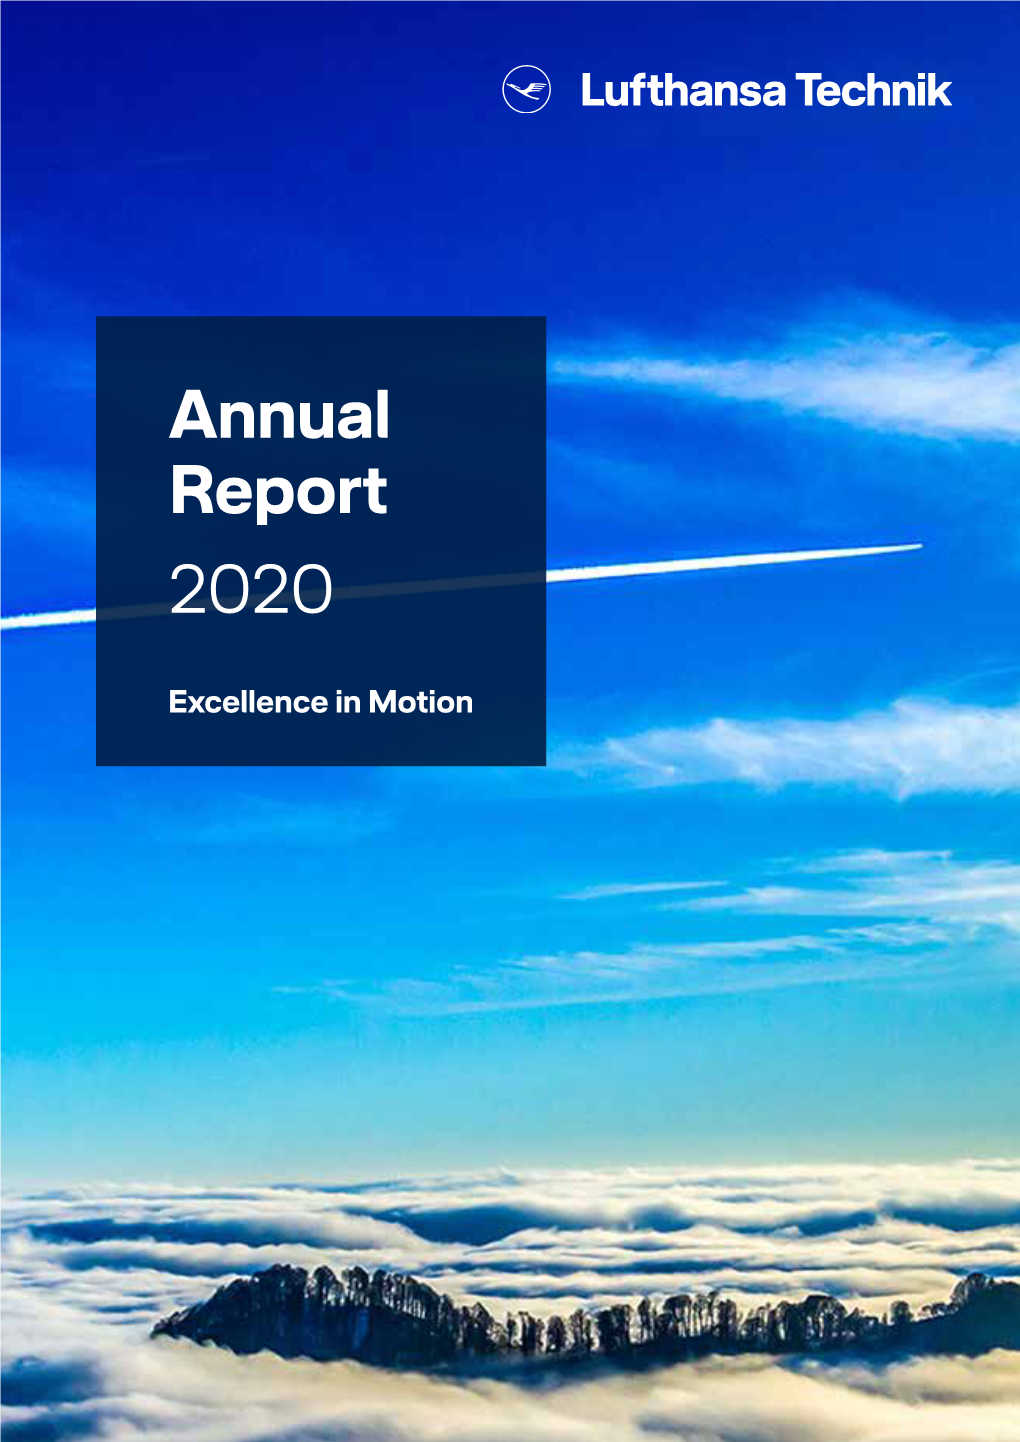 Annual Report 2020 KEY FIGURES